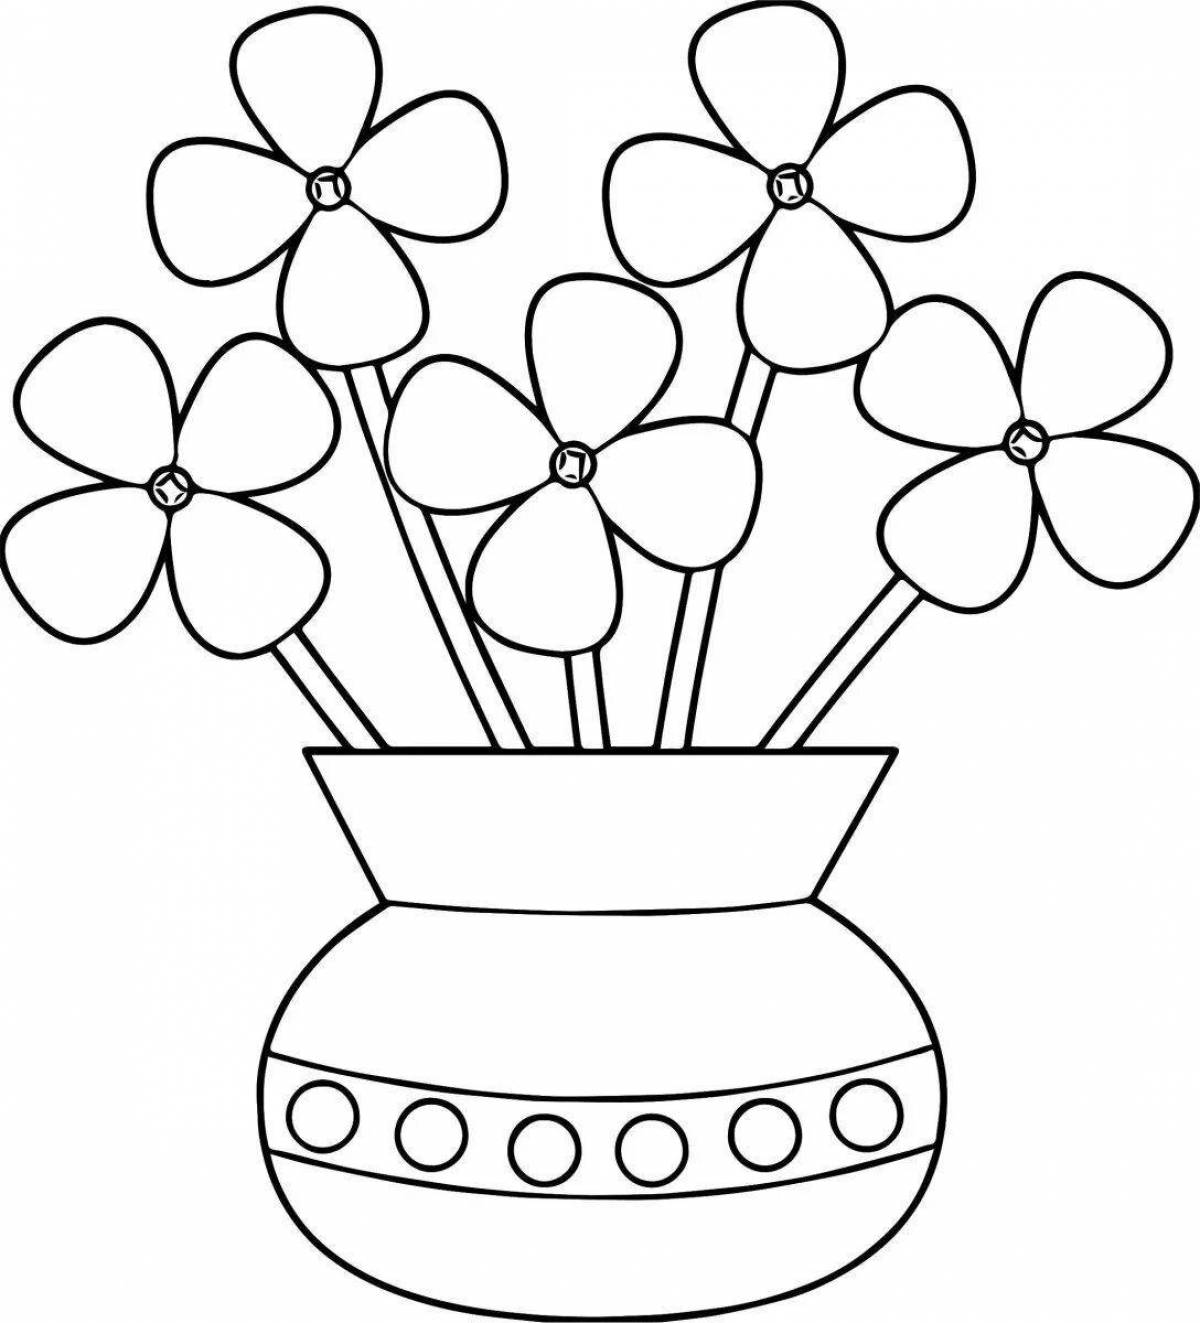 Fun coloring flowers for children 3-4 years old